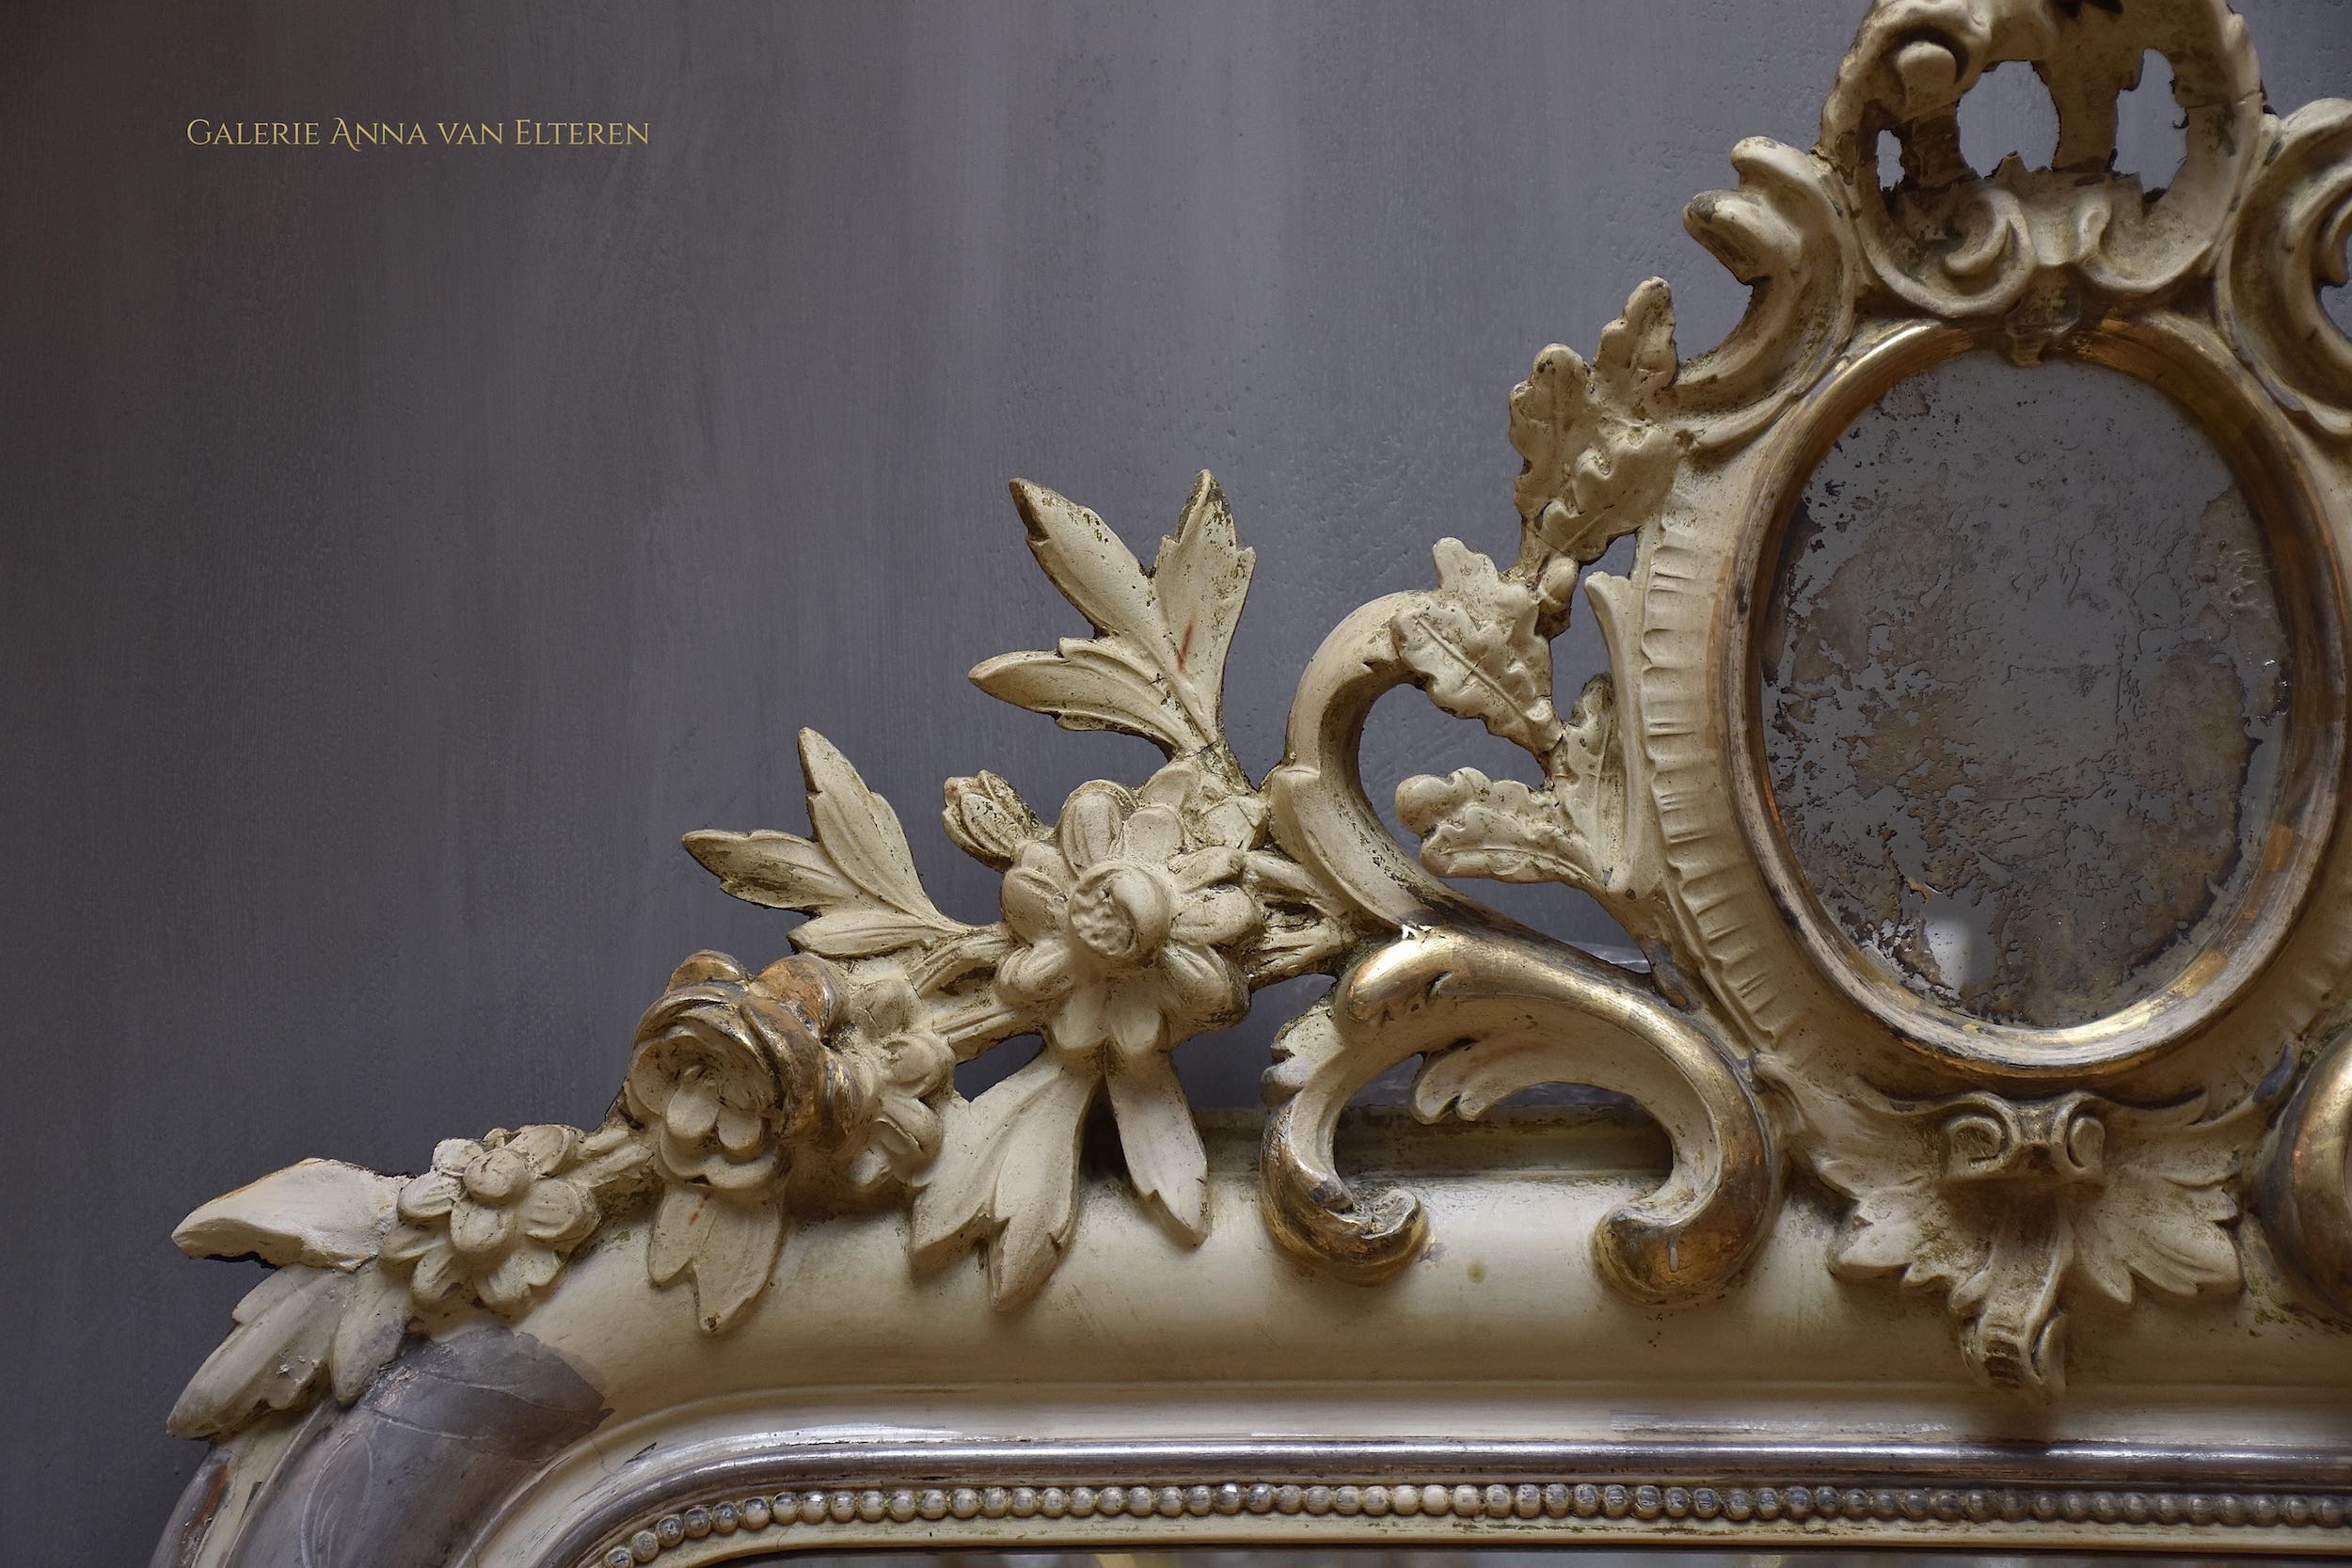 19th c. silver leaf gilded French mirror with a crown